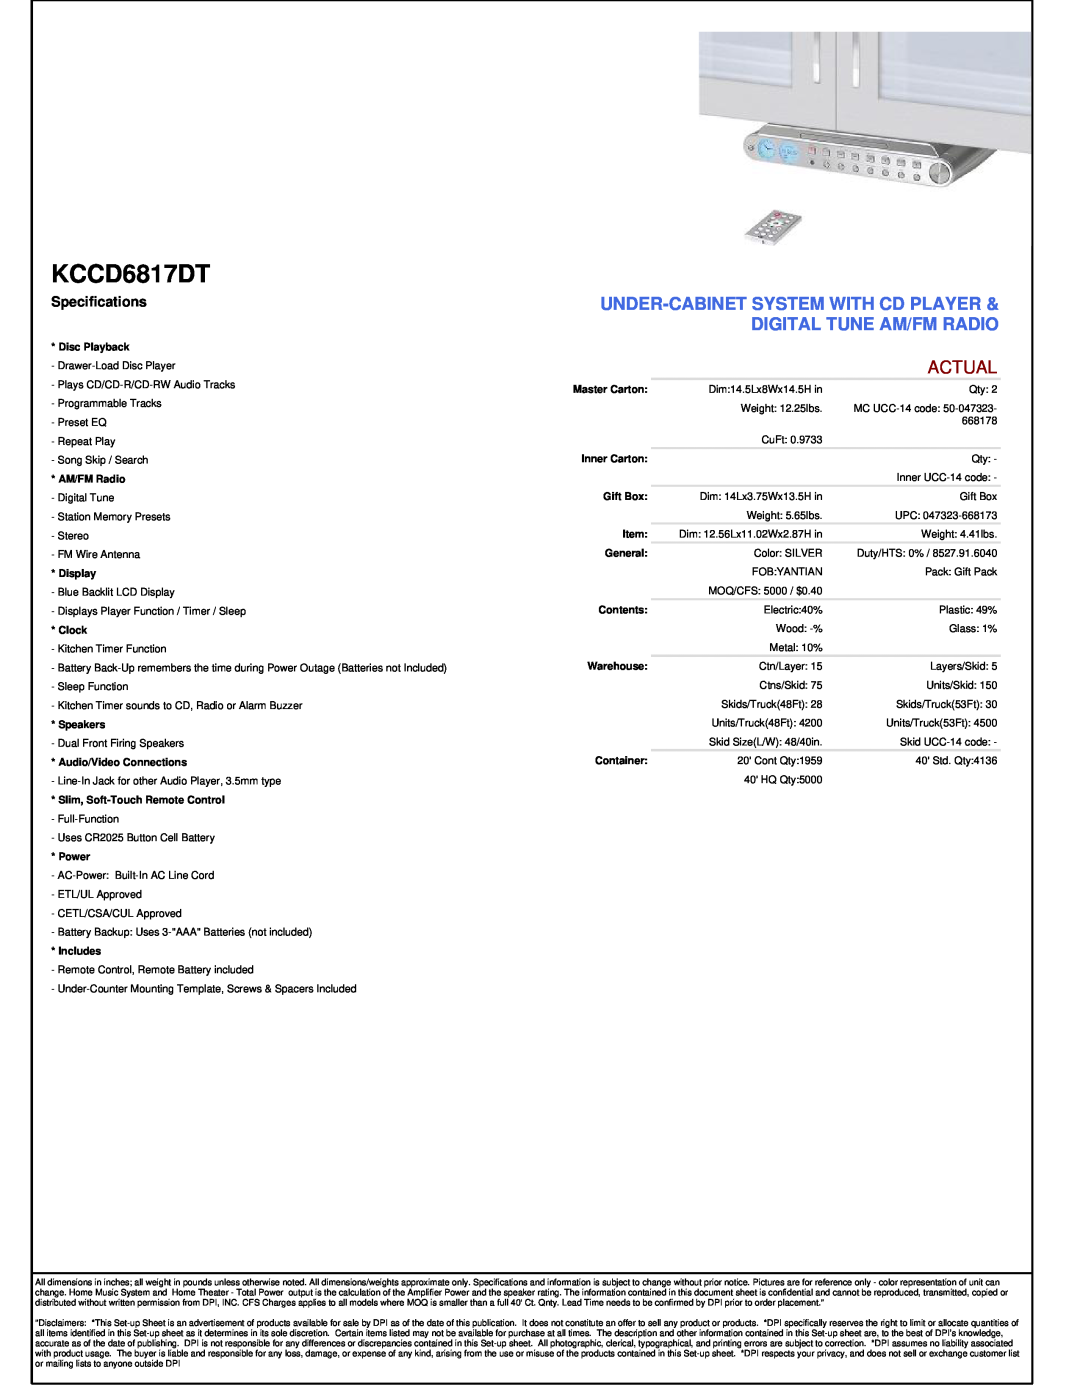 GPX KCCD6817DT manual Actual, Specifications 